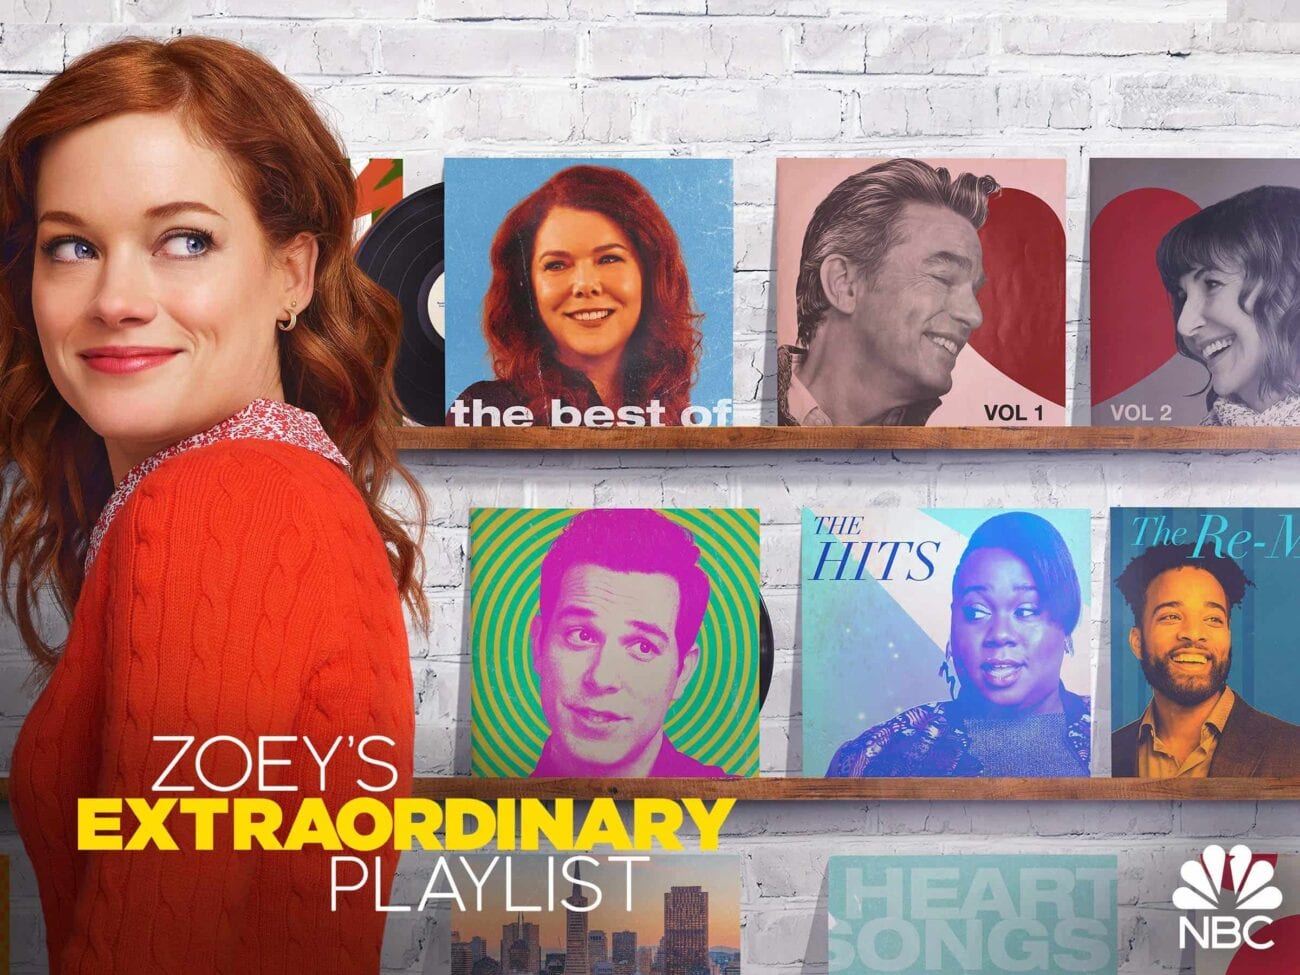 Will season 2 be the end of 'Zoey's Extraordinary Playlist'? Find out if the show's creators will be able to make a revival of the series a reality.